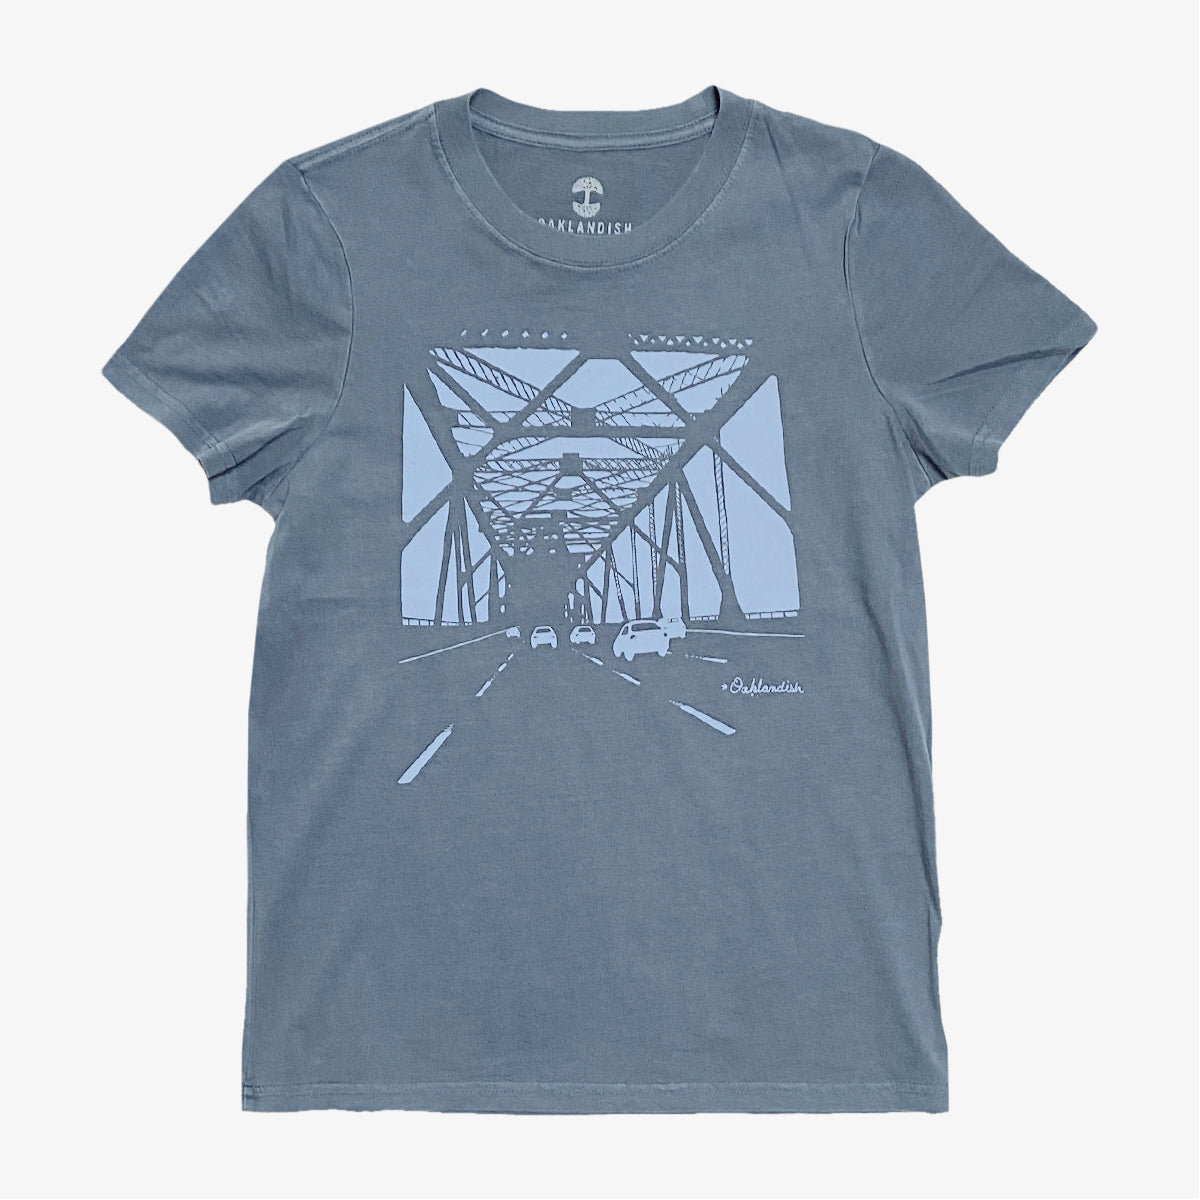 Faded blue women’s t-shirt with a graphic of the eastern span of Oakland bridge.